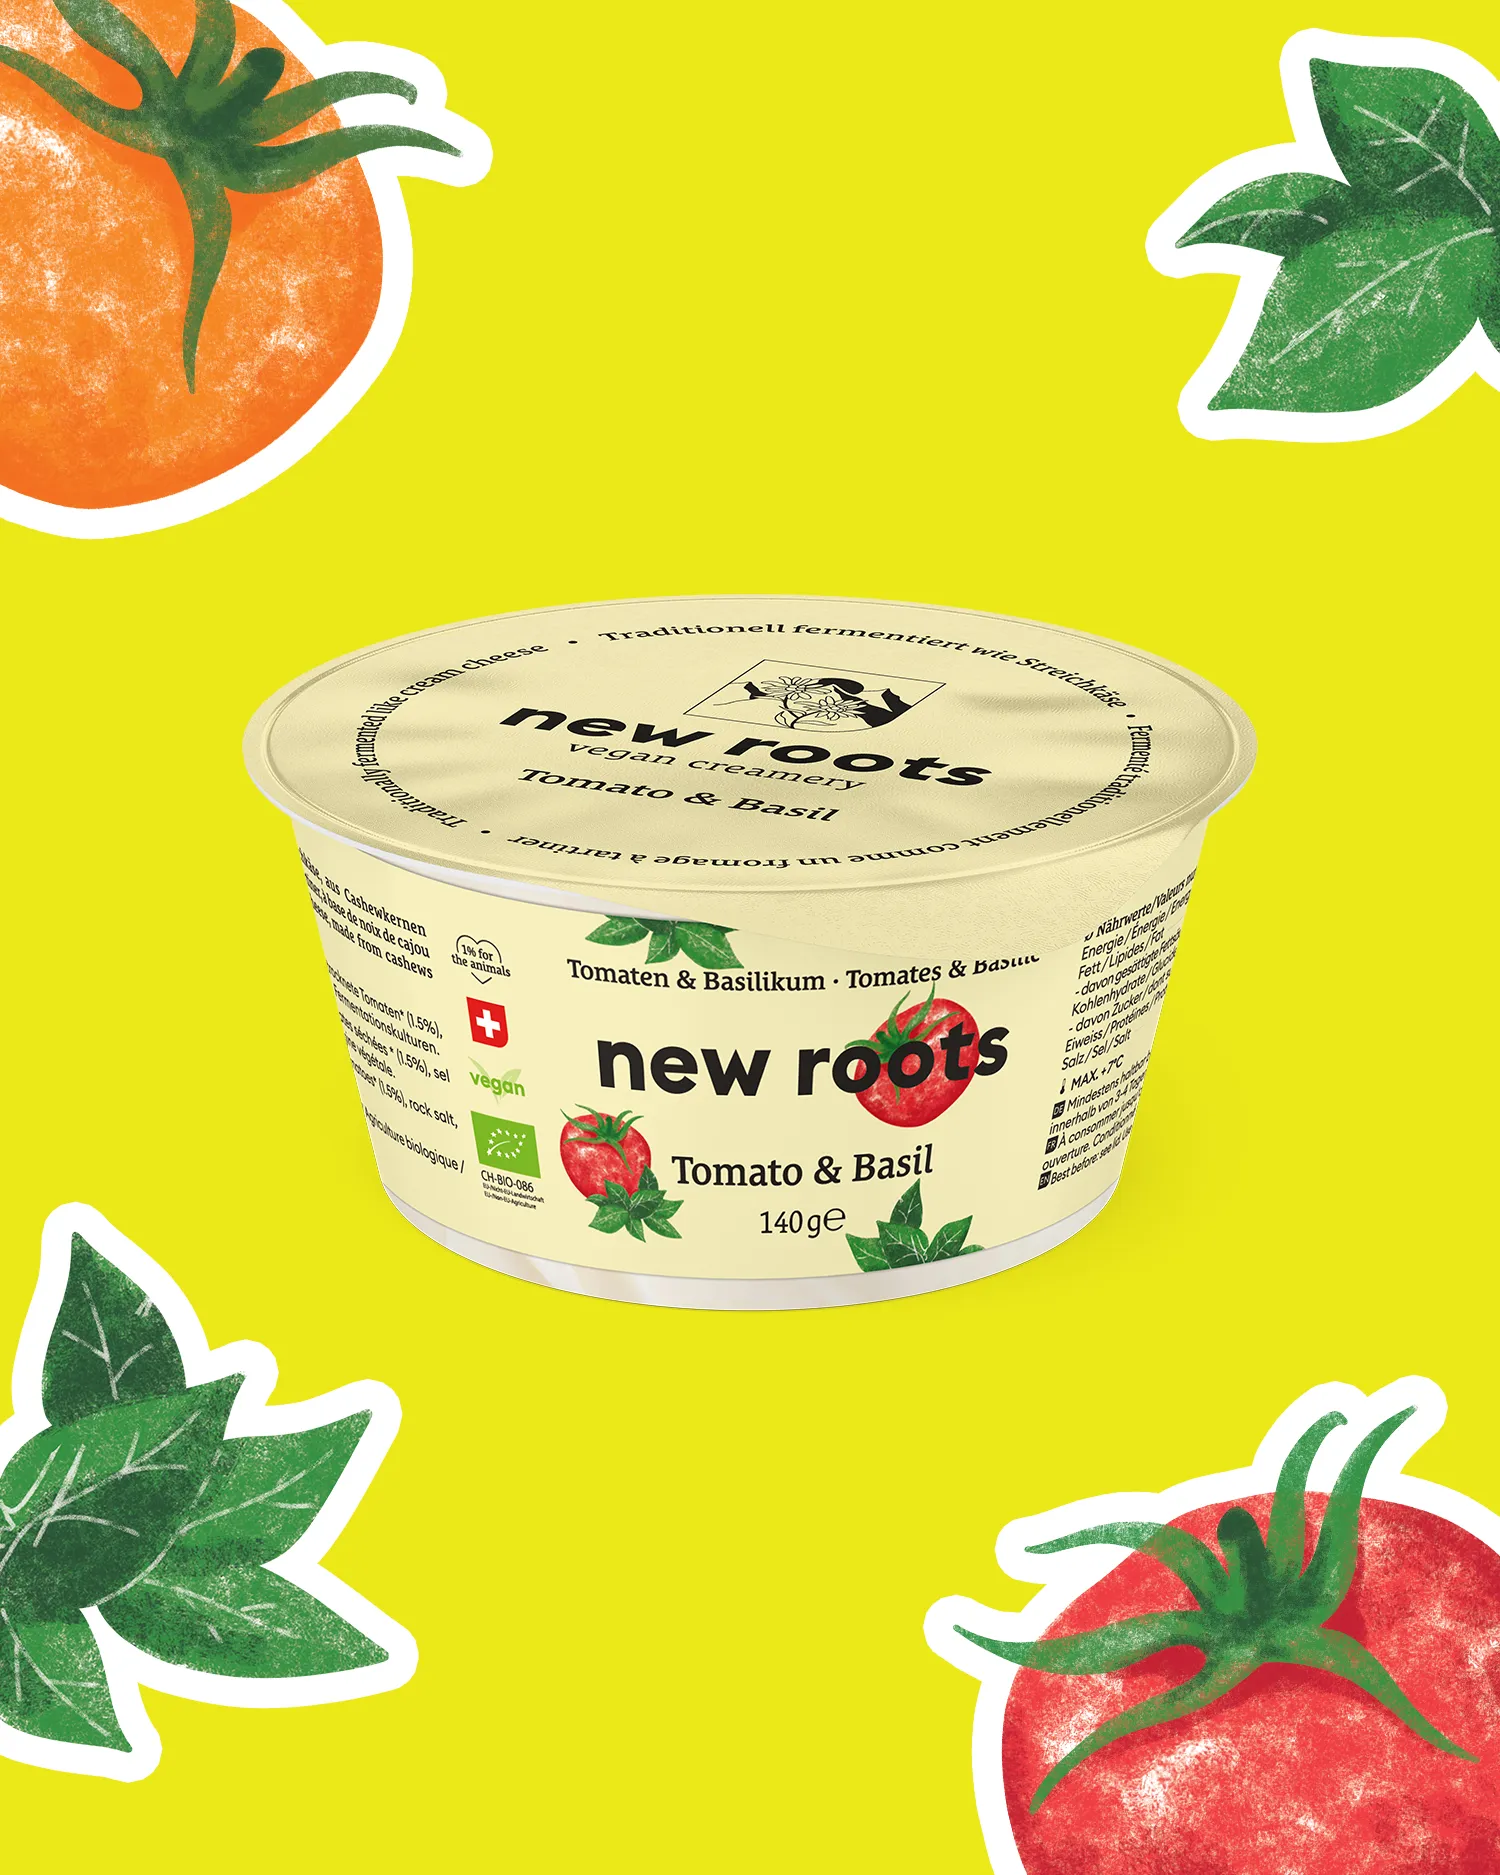 New Roots - Packaging - Spread 3D illustrations